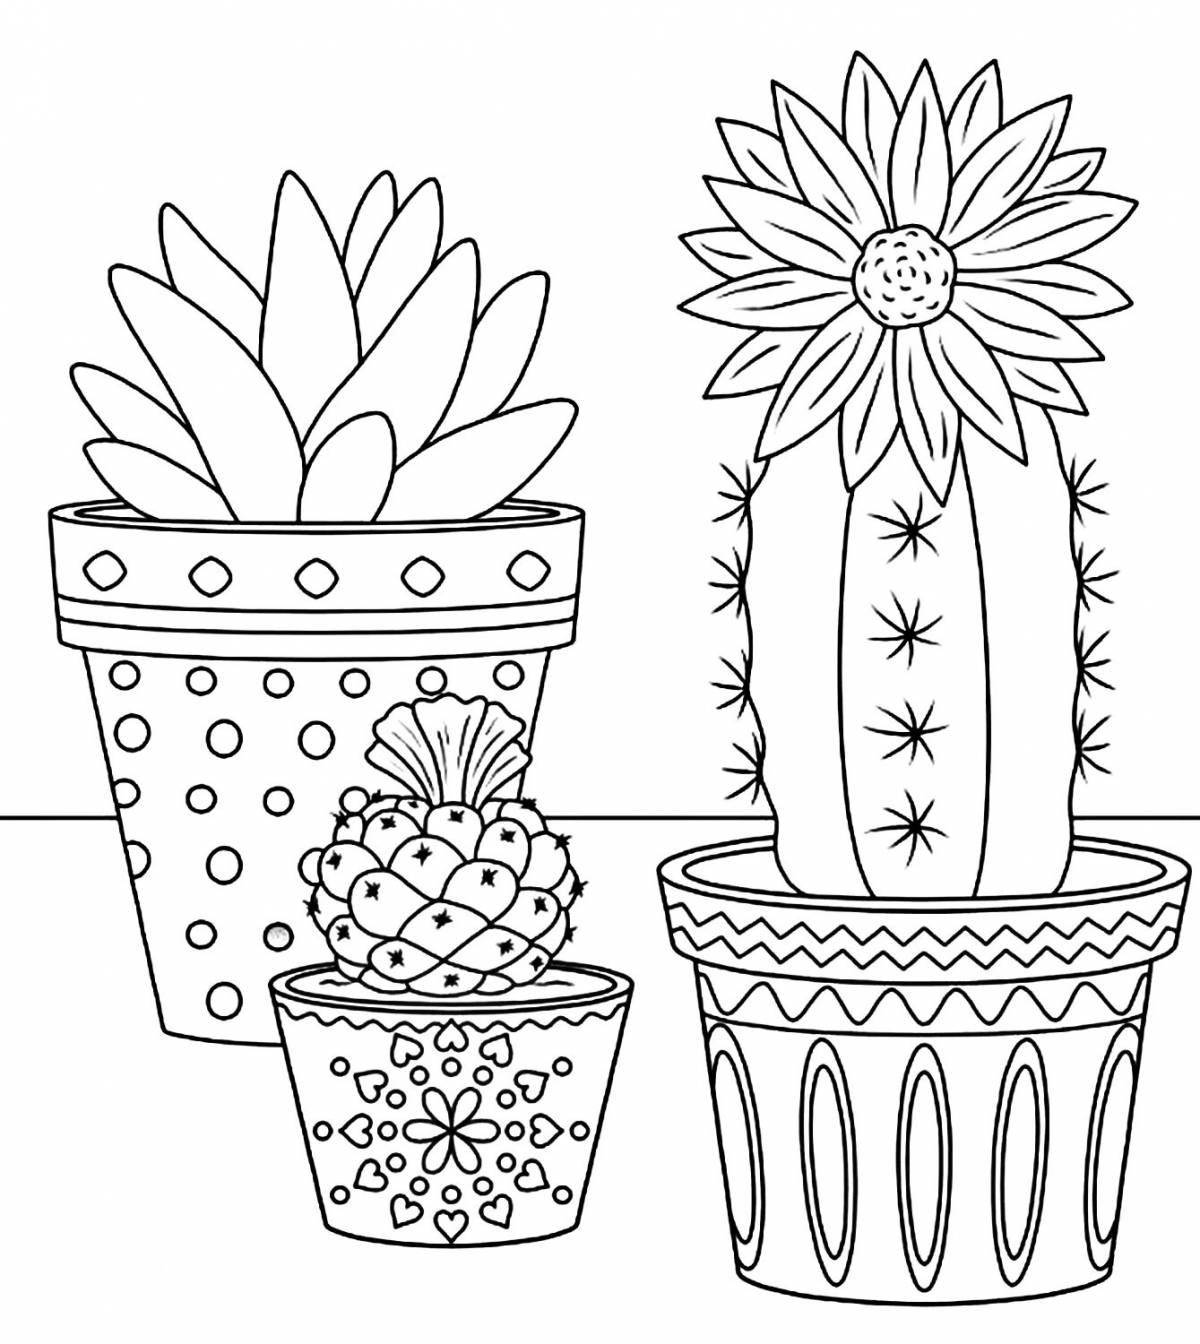 Adorable houseplant coloring page